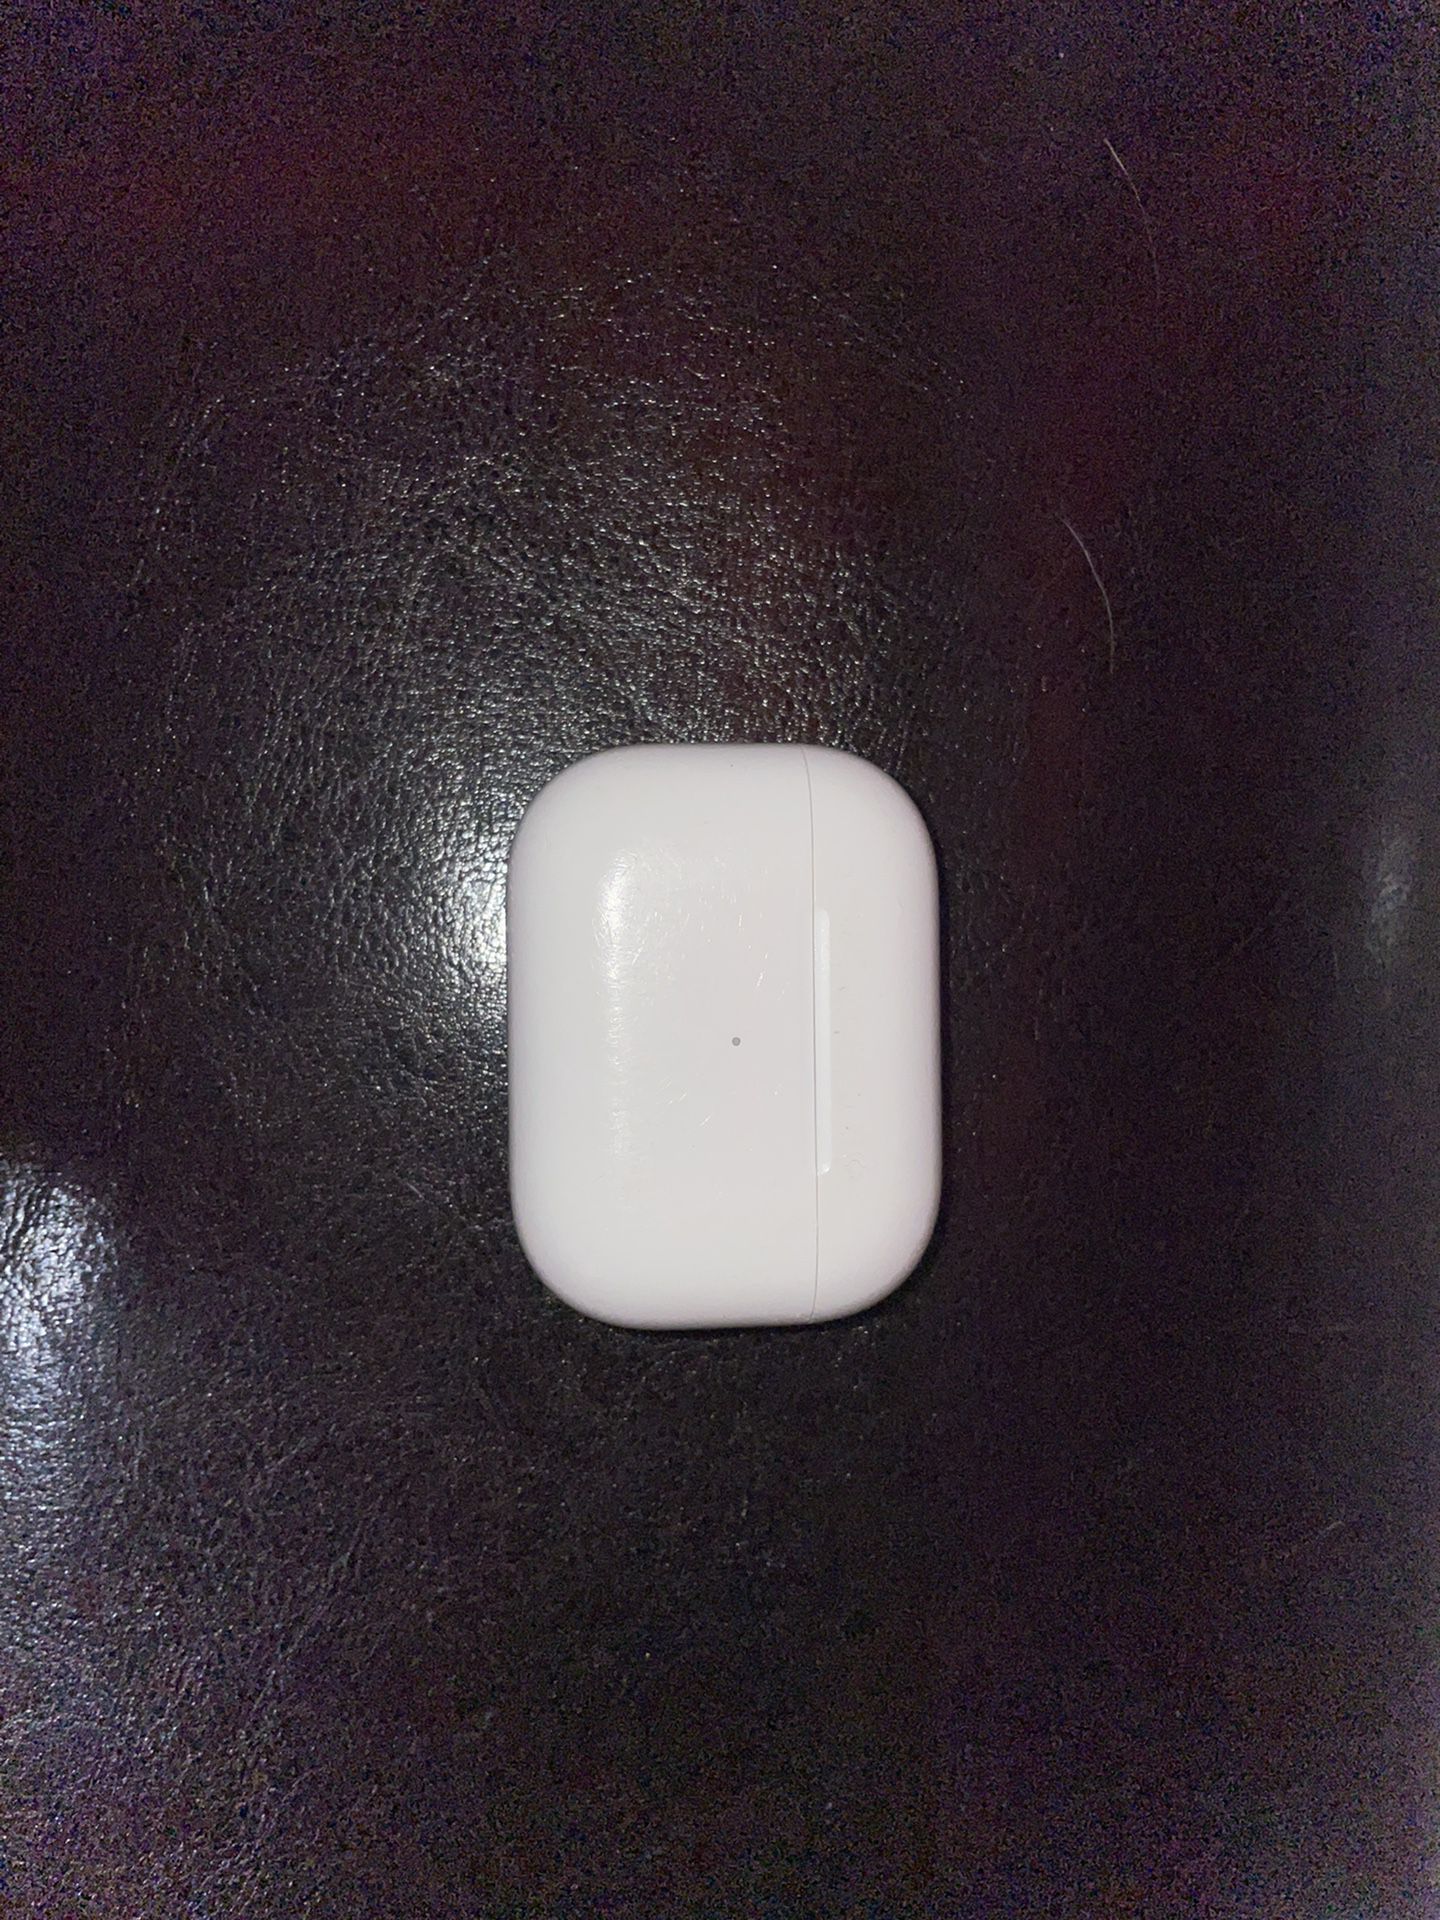 Used Airpod Pros Amazing Condition